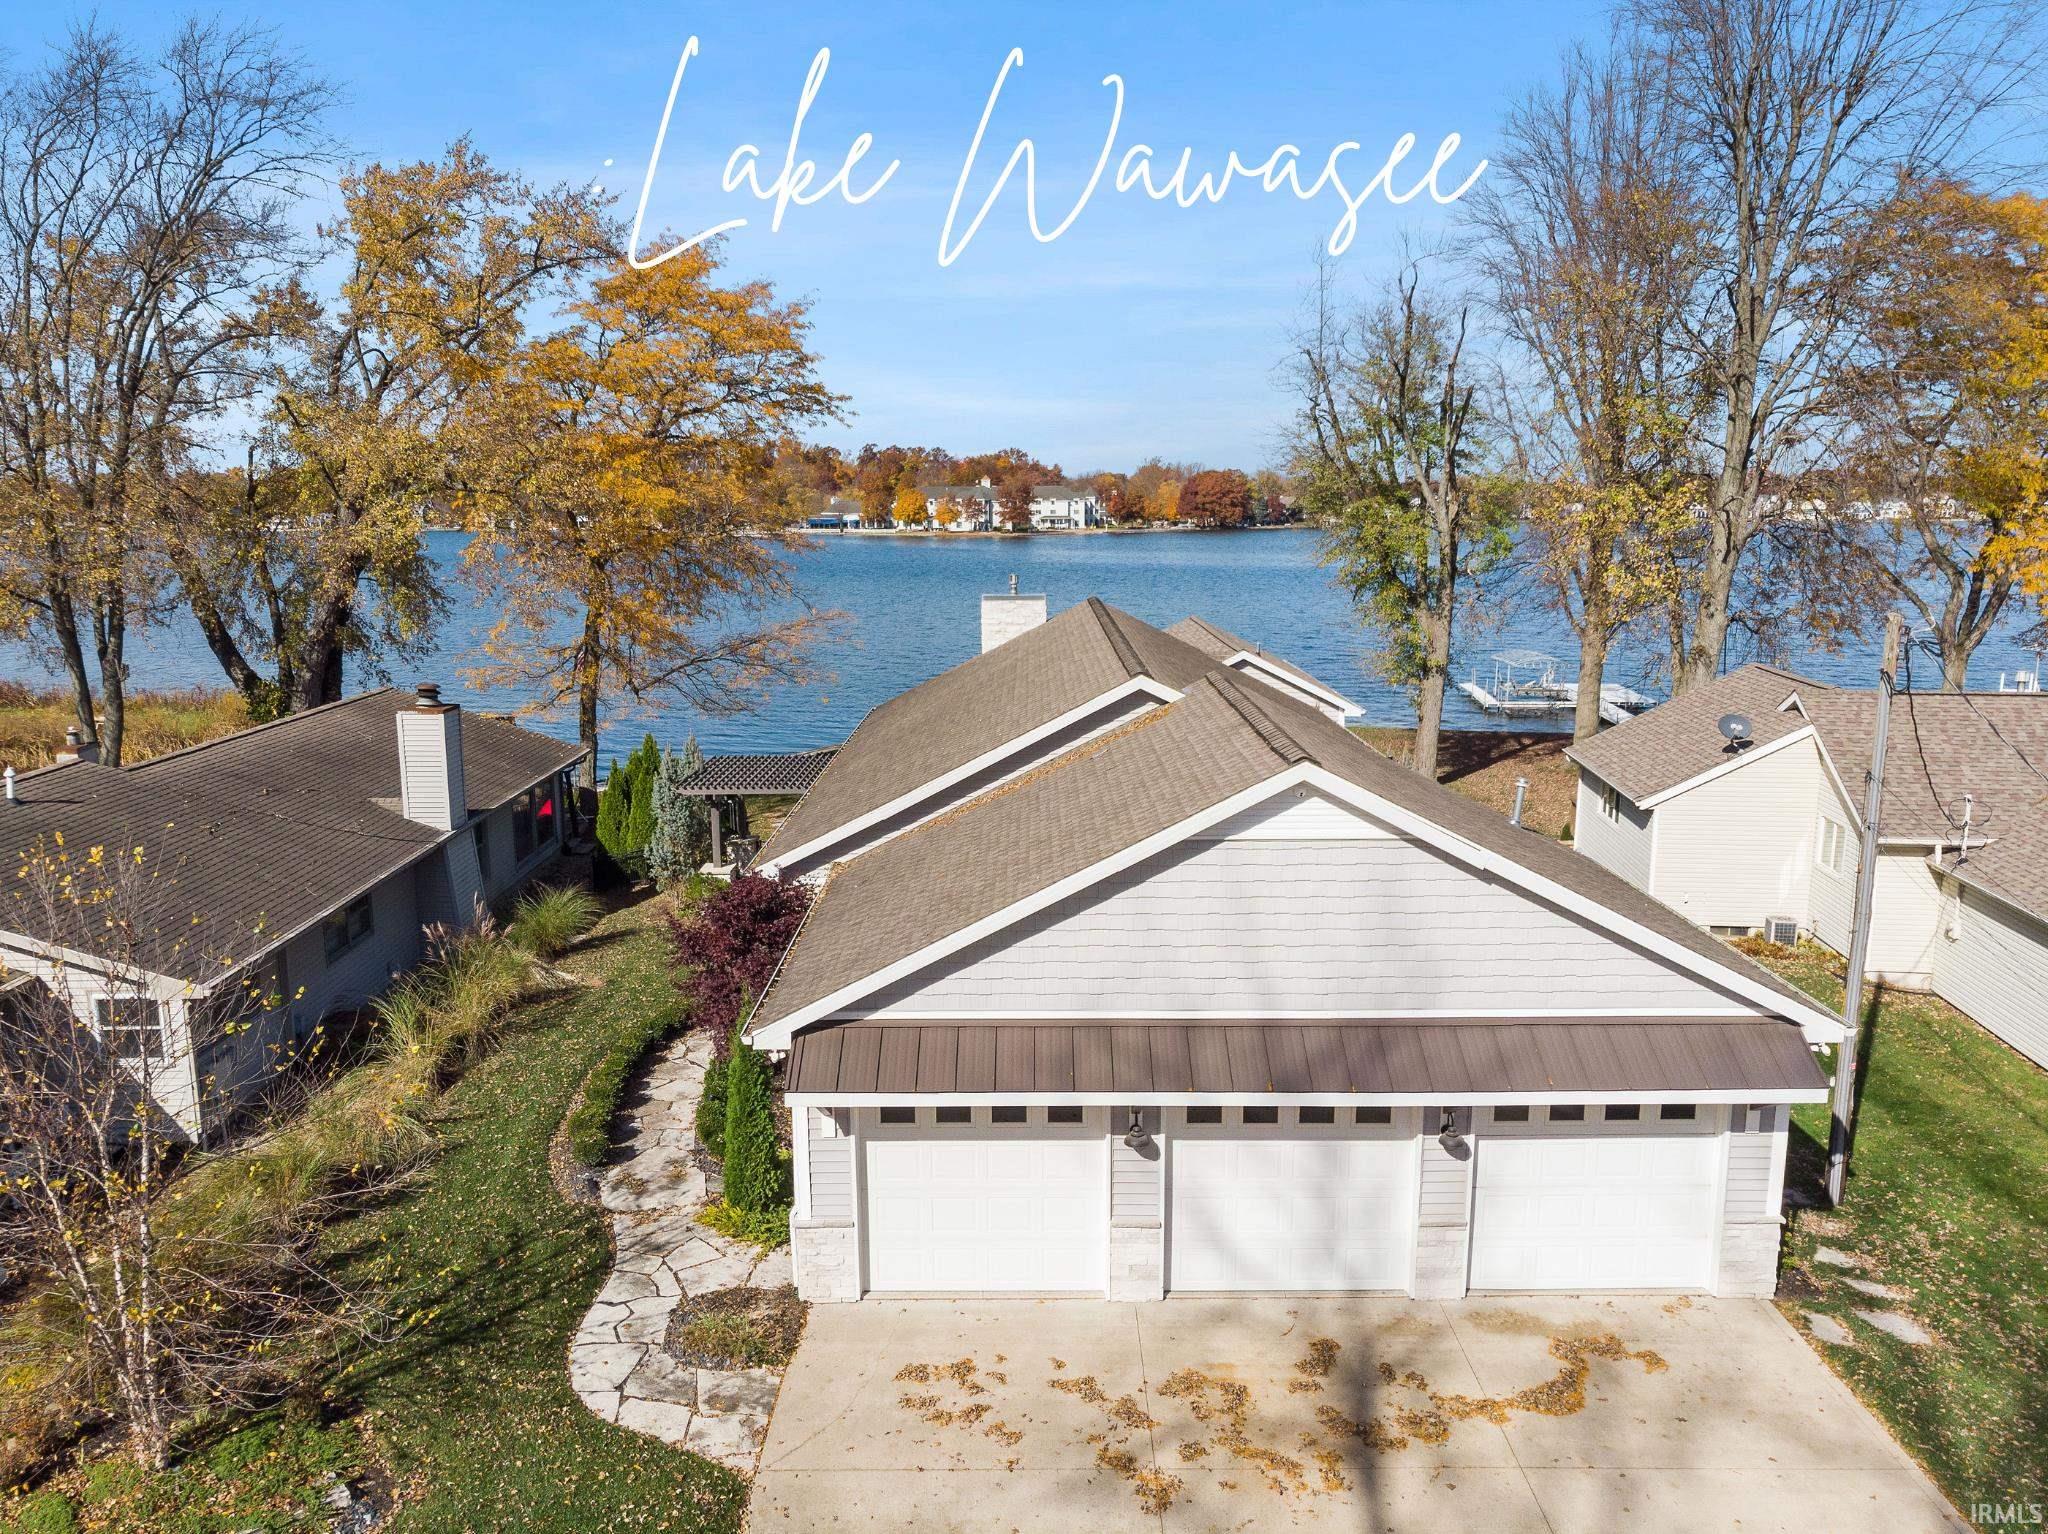 Just show up with your bathing suits! This 4688 total sq ft, newly renovated move-in ready home with has it all--except you! If you're in the market for a lake-level home that will create long-lasting memories for your family and friends, your search might be over w/this amazing find on fabulous Lake Wawasee! Imagine yourself relaxing on your new Craftsman Style front porch w/ panoramic views or sitting on your spacious waterfront stamped concrete patio, under your awesome pergola that is complete w/ gas grill, granite counter w/ stools, built-in firepit & outdoor TV. The main house has an inside & outside SONOS stereo system to enjoy w/ excellent sound. Landscaping is professionally designed. The large 125’ frontage provides plenty of picturesque views. Inside, the newly updated home features 2,488 sq. ft. of living space in main home w/4 bedrooms, 2 primary baths w/ a total of 3 full baths, engineered hardwood floors, custom blinds & draperies, Dacor Professional Gourmet Kitchen appliances, pot filler, large pantry for the family Chef, Quartz counters & professionally furnished w/ gorgeous furniture & decor (most items stay w/houses). The guest quarters provide 2200 sq. ft. of addt’l living including newly furnished efficiency apartment, decorated professionally w/1 bedroom, 1 loft area w/2 full beds, leather sectional, 2 full baths, & rec room w/new sleeper sofa, new additional couch & Custom Bar w/stools. The Rec Room comes w/ Pool Table, Foosball Table & Dart Game, built-in industrial gun safe, & built-in industrial wall unit. Huge fenced-in yard in back house for kids & pets that backs up to wonderful forest preserves that gives you access to the trail--located across the road behind backhouse. The generous .78-acre lot w/plenty of parking & 3-car attached garage in front house & 2-car garage in backhouse. Best yet, is the homes come partially furnished w/new furniture & some décor.  Two dock configurations w/Dock Boxes, Dock Bench & Flower Boxes for Docks.  Too many extras to mention! With picturesque views, spacious indoor & outdoor entertaining areas, & luxurious fixtures, this property truly is one of a kind! This opportunity won’t last! See Video Tour!